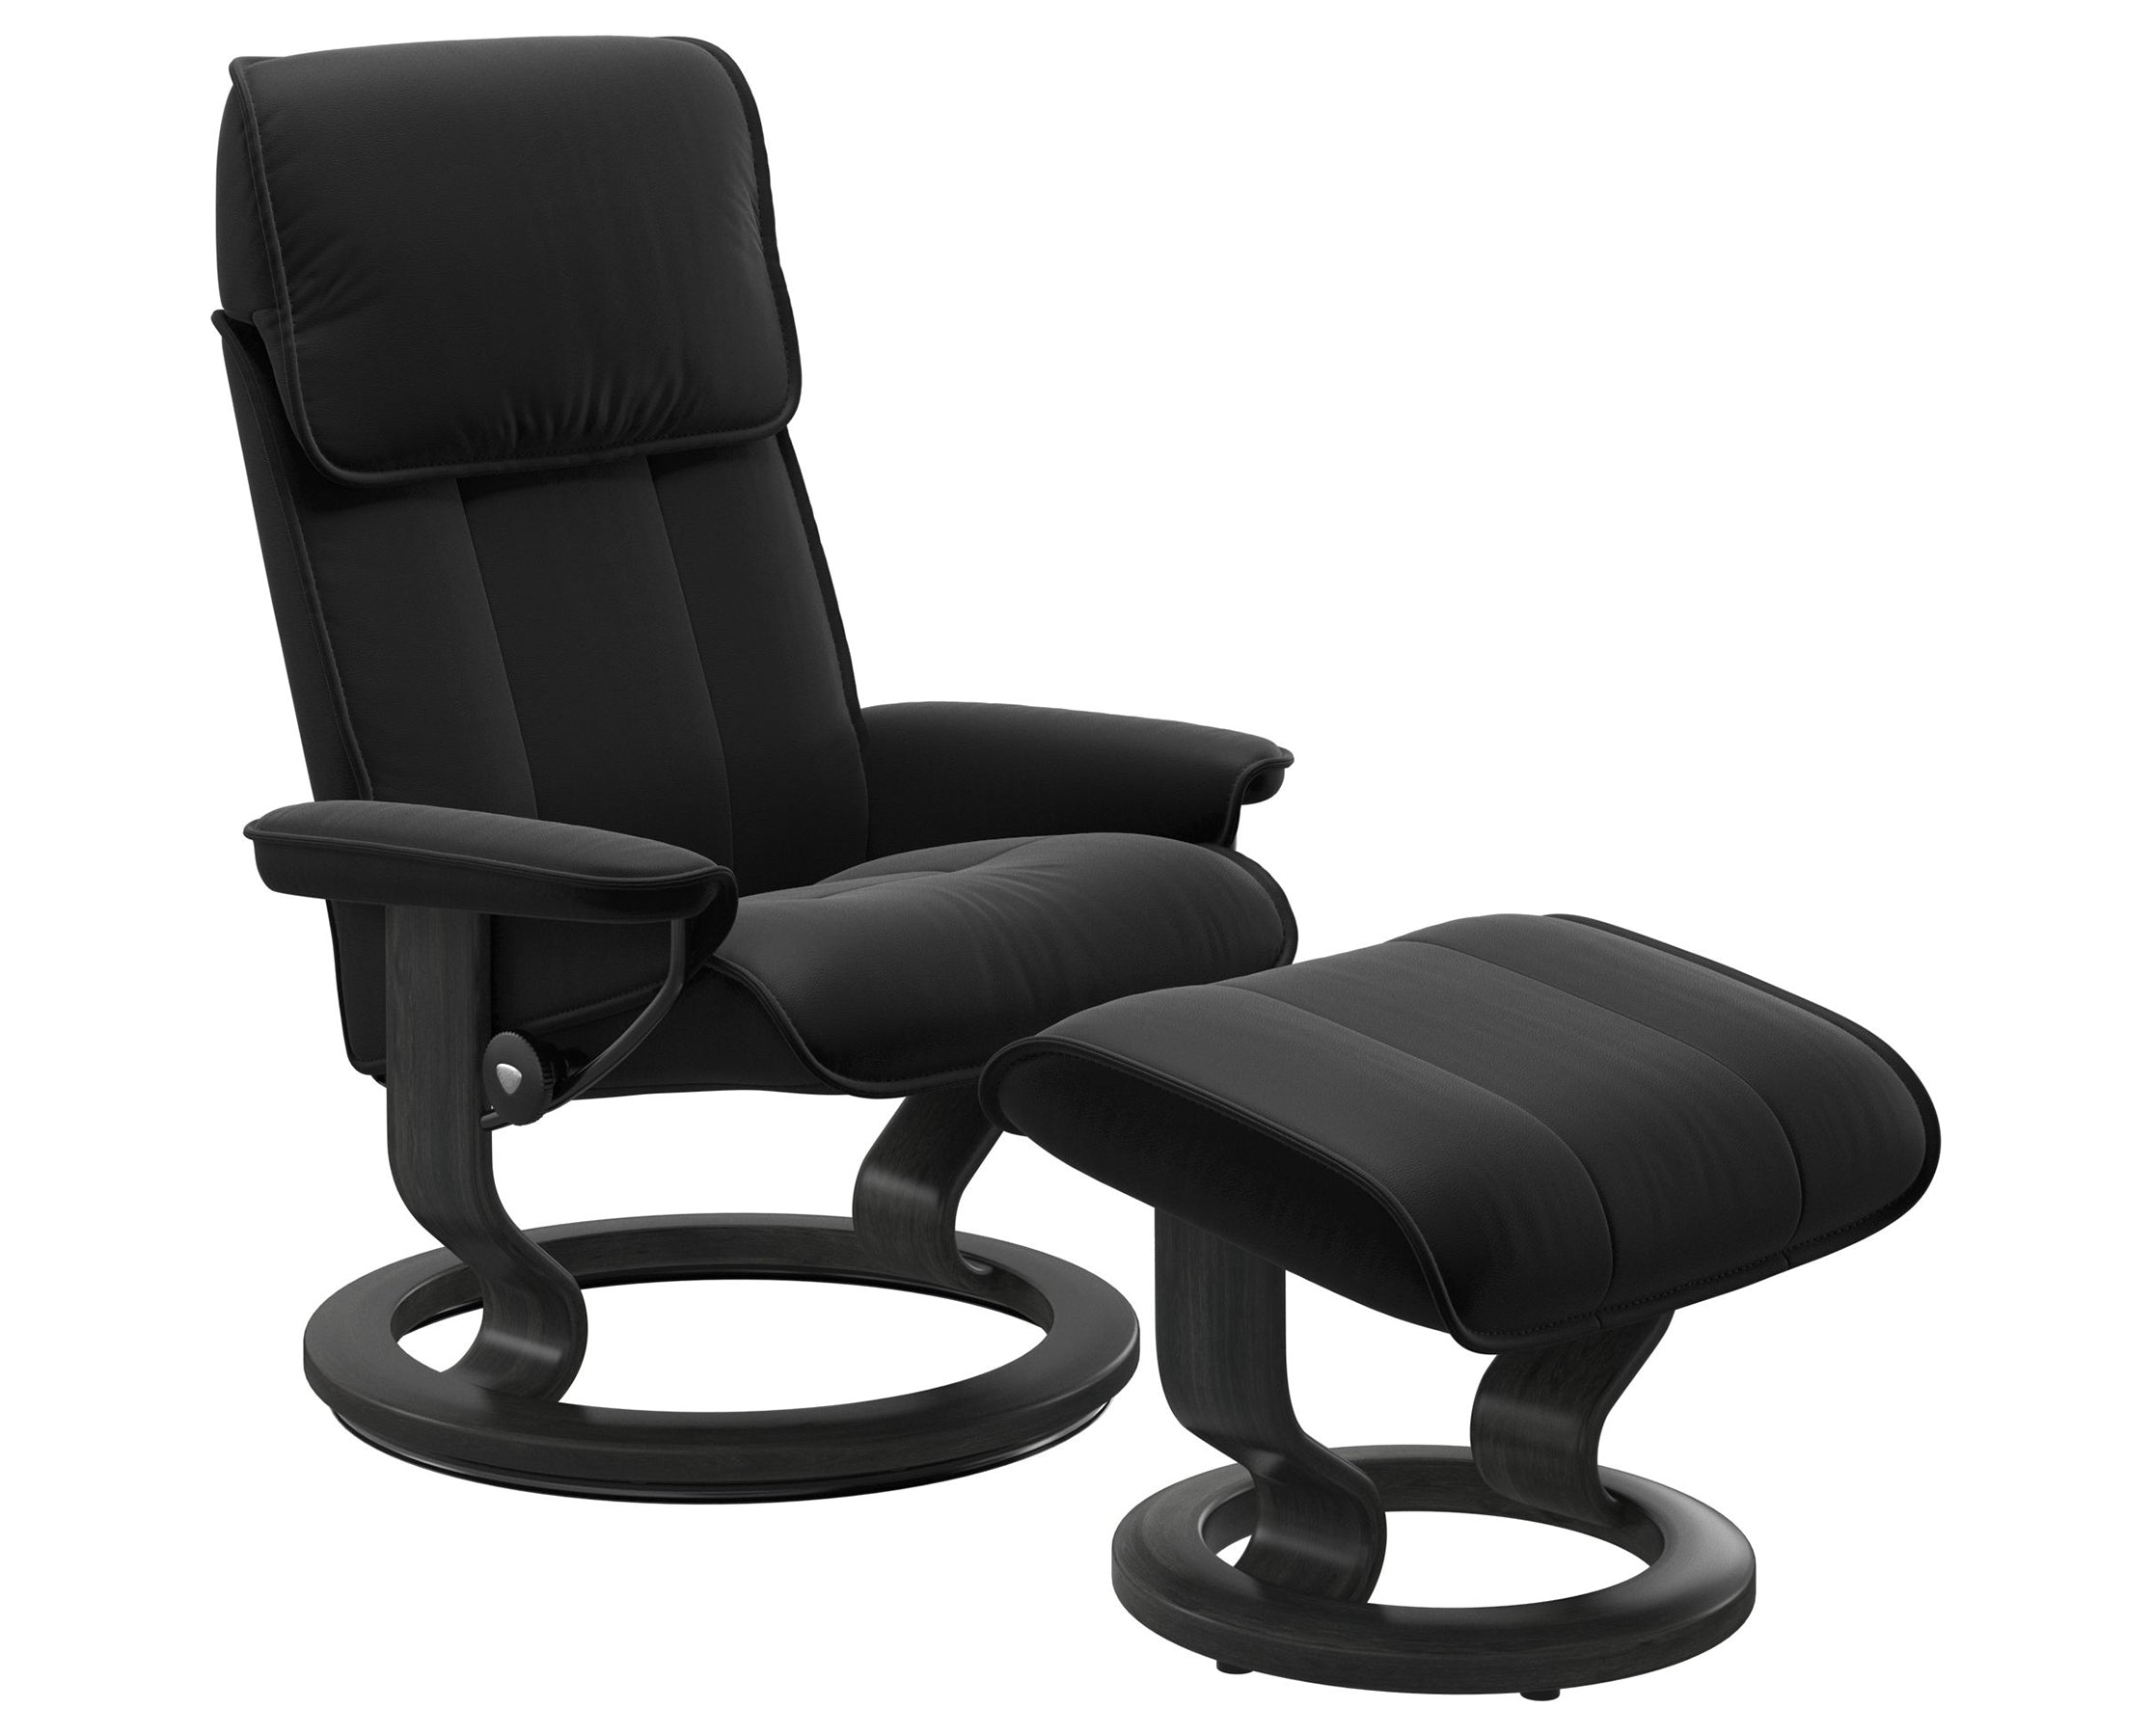 Paloma Leather Black M/L and Grey Base | Stressless Admiral Classic Recliner | Valley Ridge Furniture